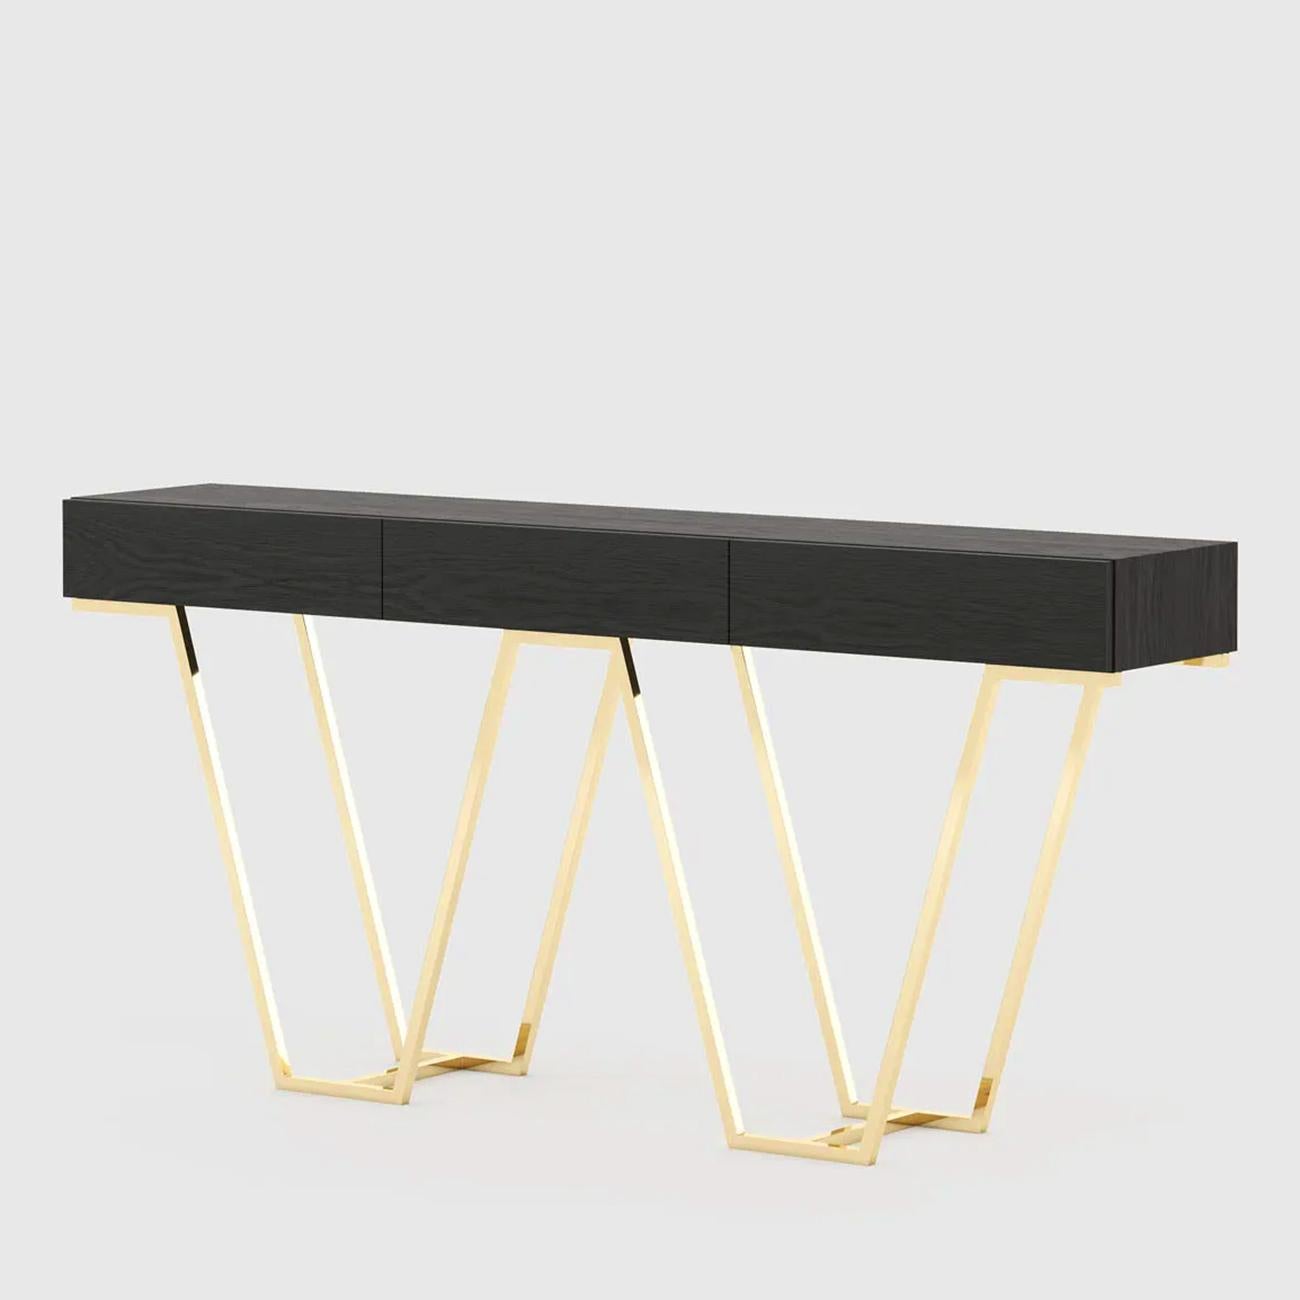 Console table Harp with top in matte black ash finish, including
3 drawers with easy glide system. Base in polished stainless
steel in gold finish.
Also available in matte ebony, or matte oak grey, or natural oak,
or matte walnut, on request.